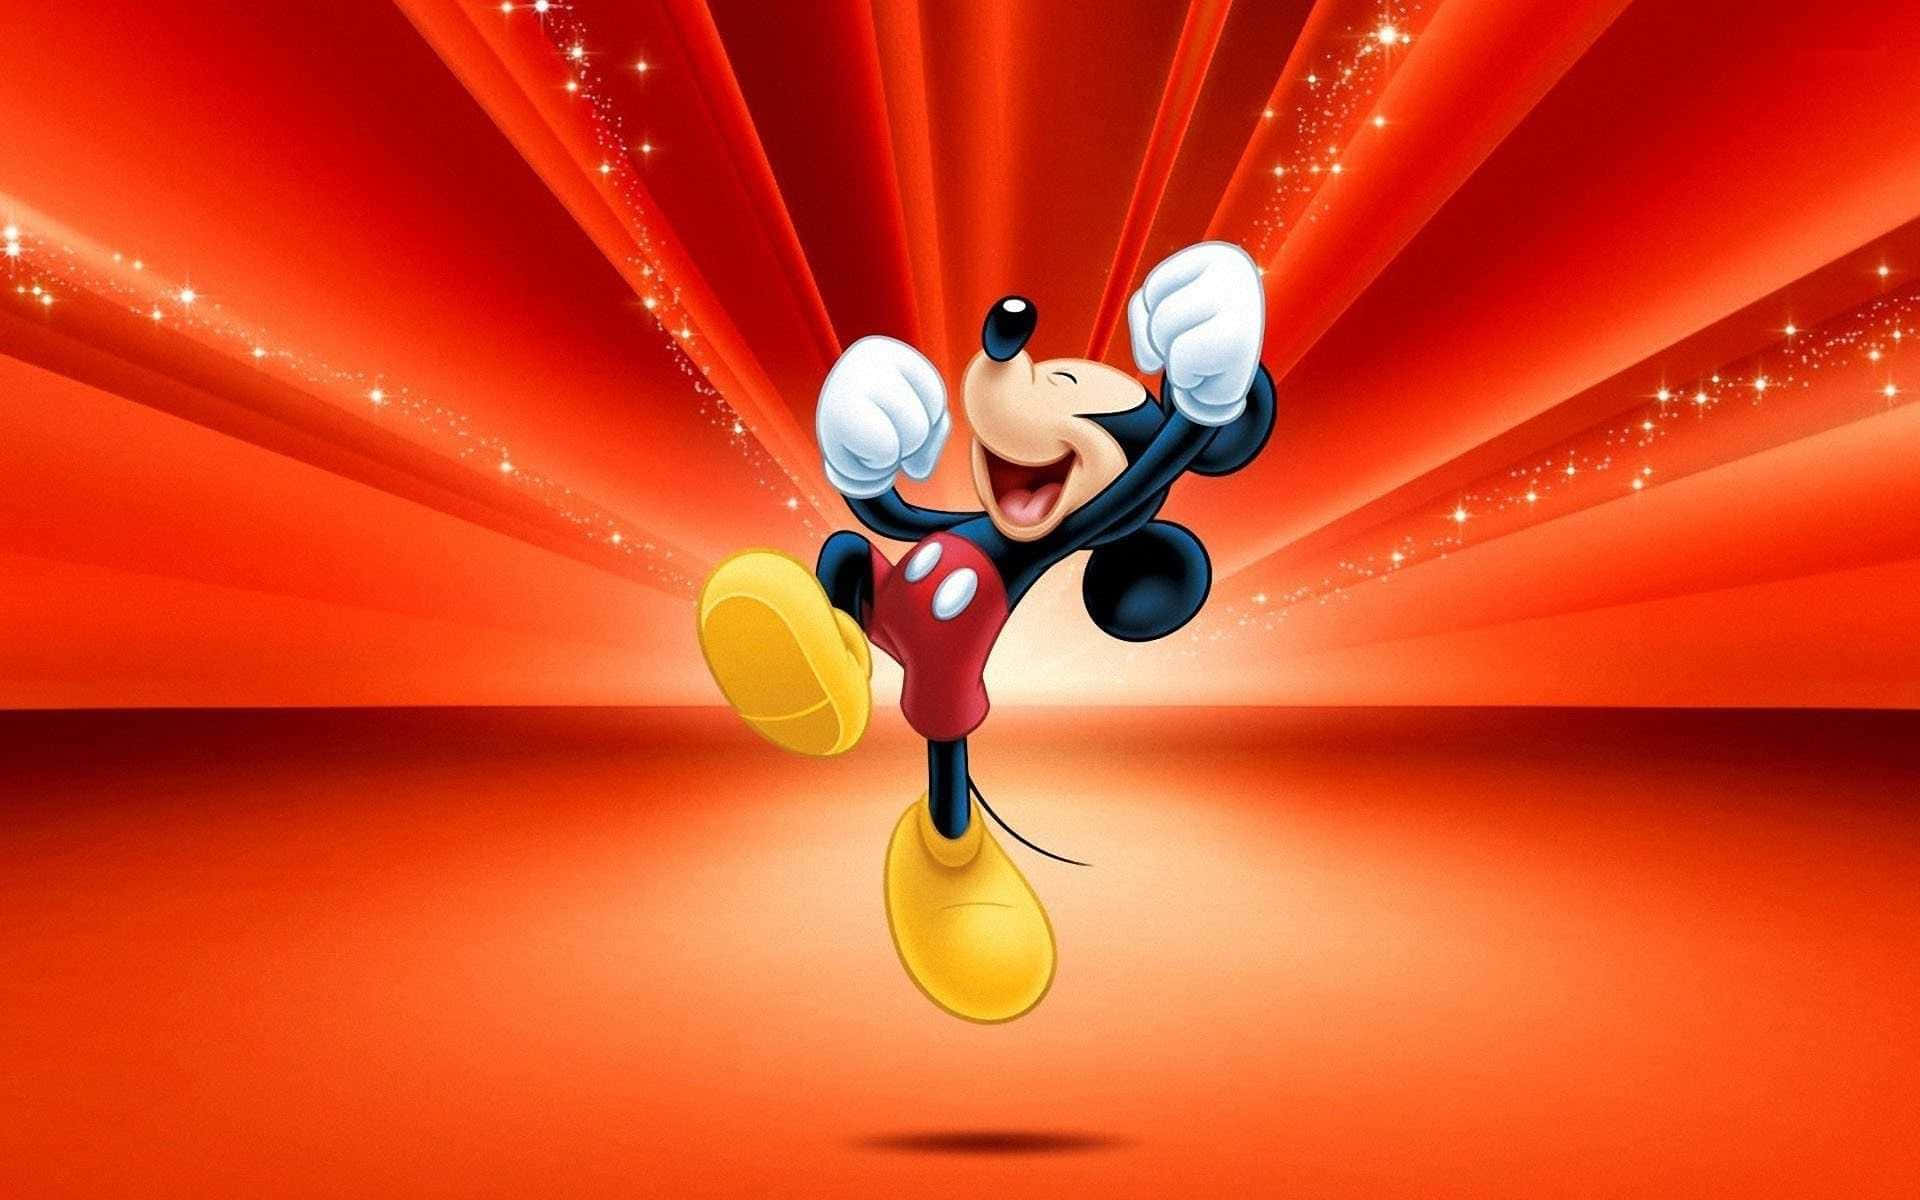 Welcome to the Magical World of Mickey Mouse Wallpaper